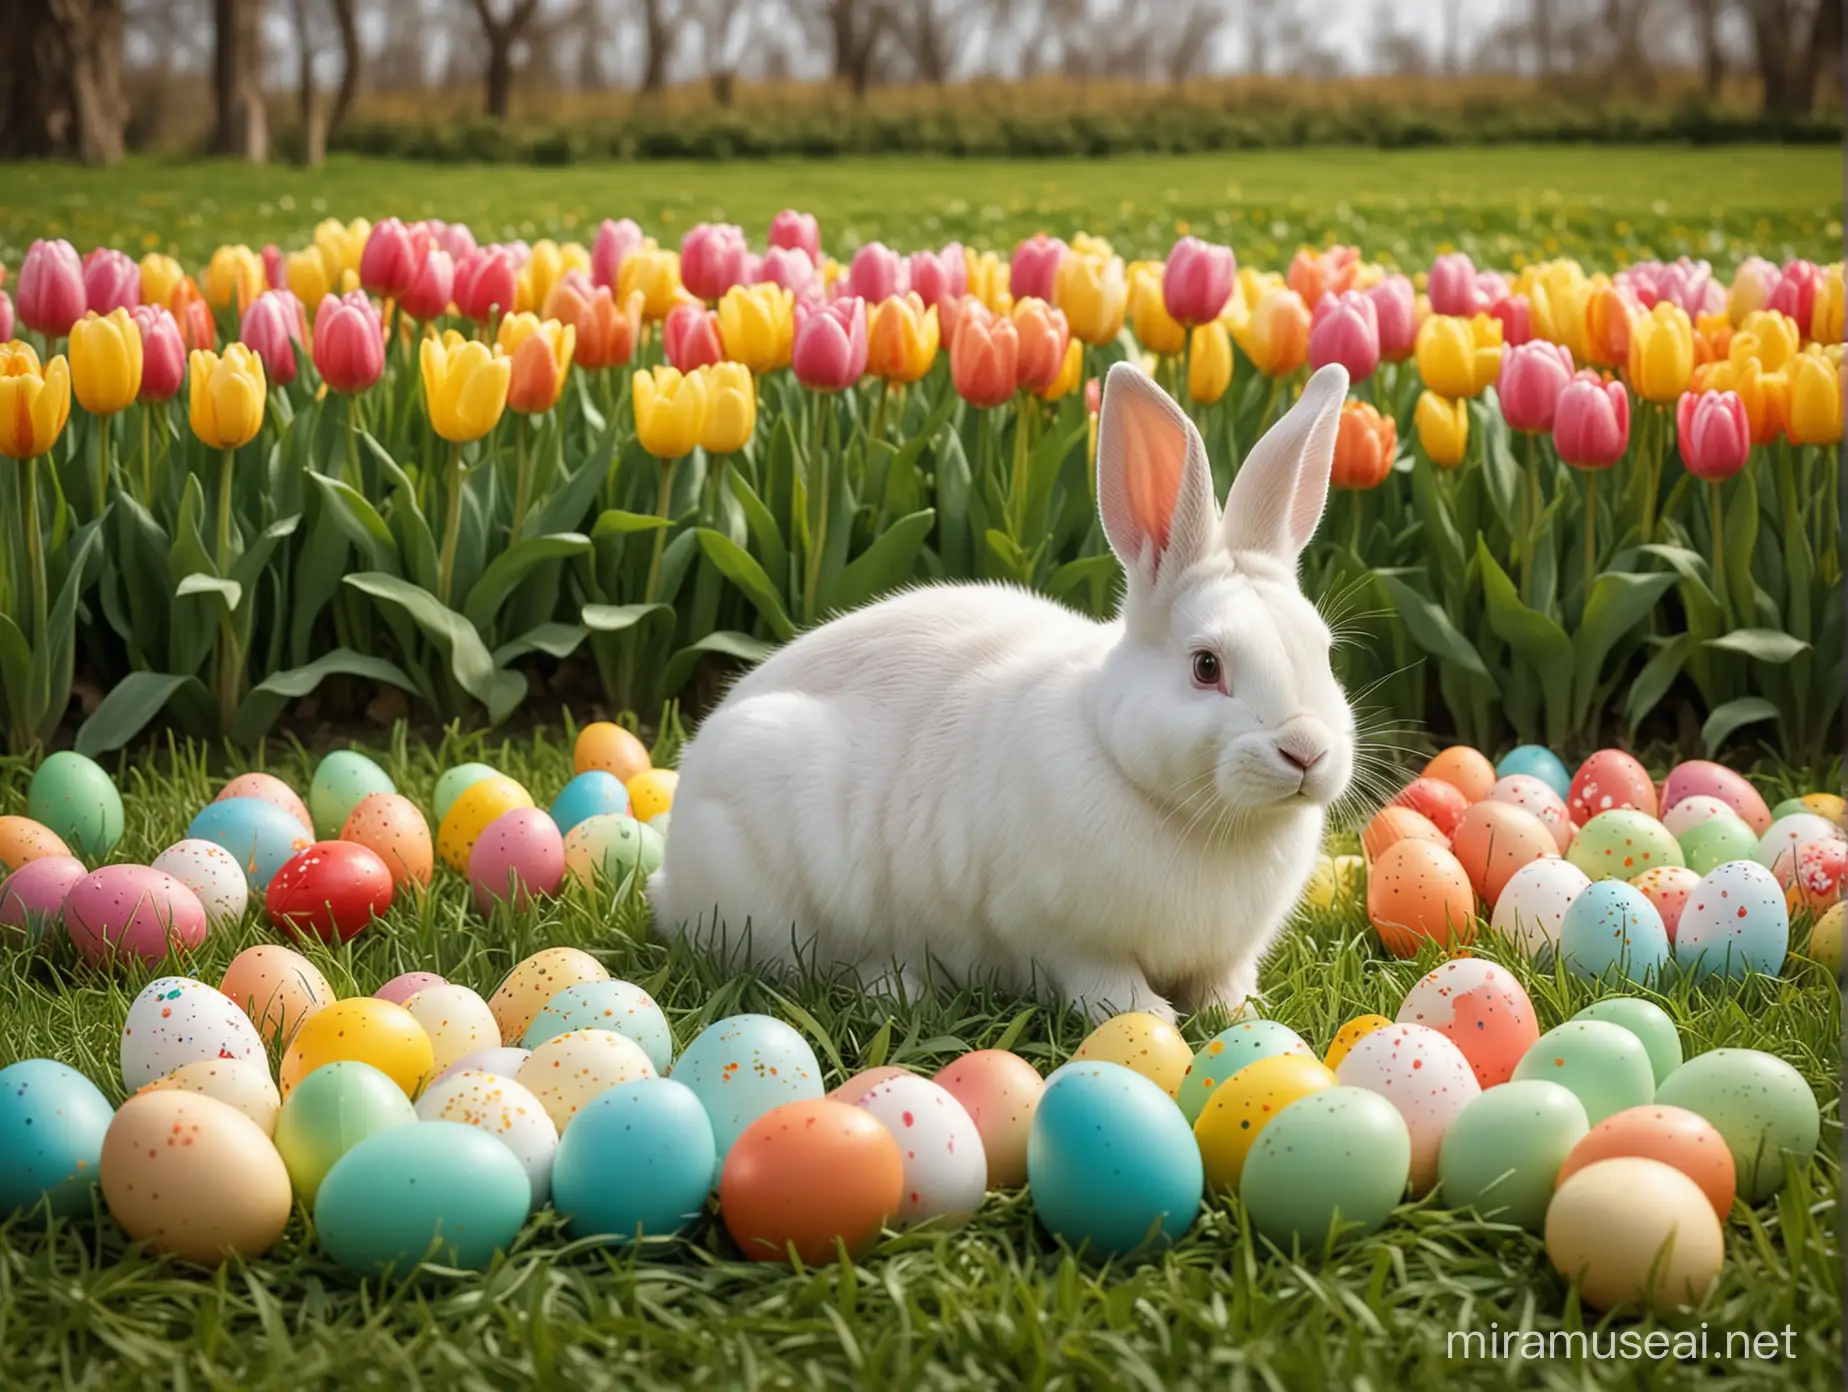 Fluffy White Bunny Relaxing Among Vibrant Easter Eggs and Blooming Tulips on Lush Green Lawn